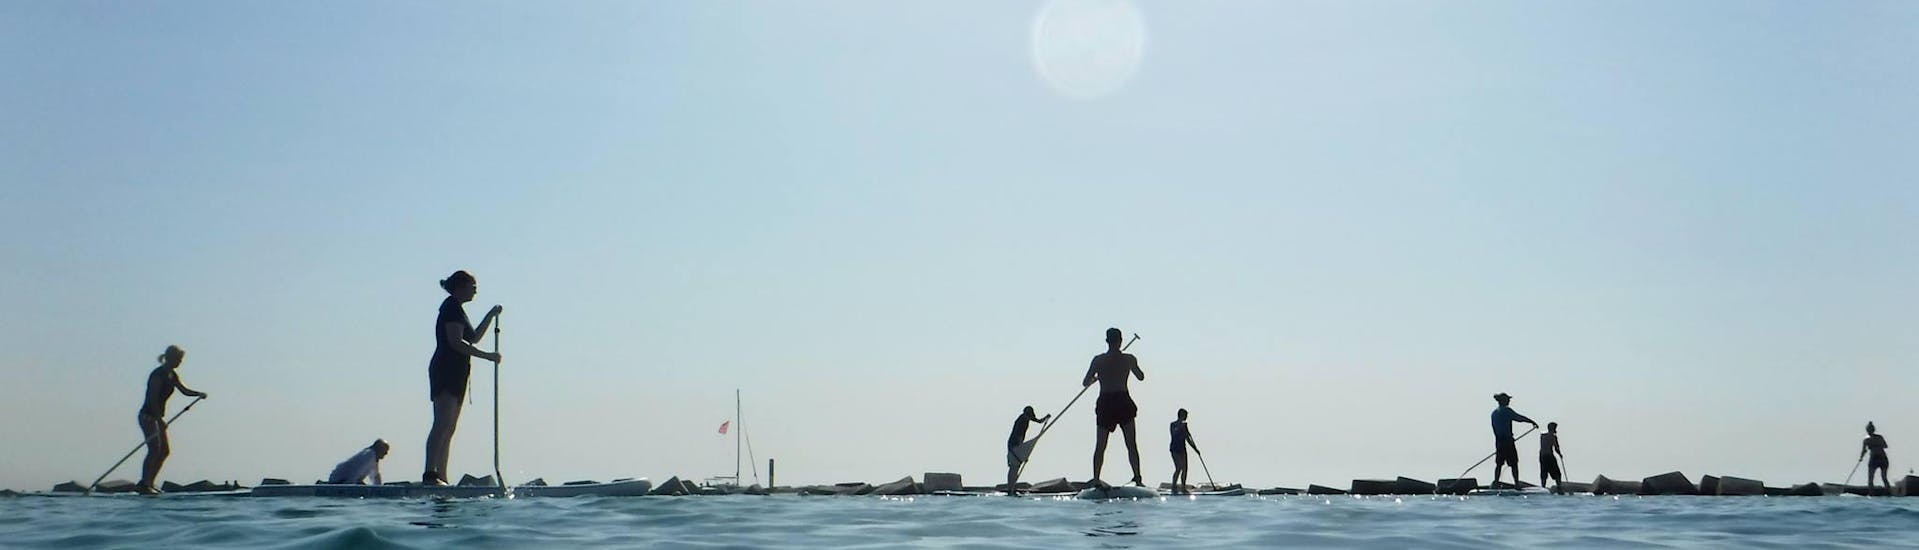 Stand Up Paddleboarding Lessons in Barcelona for Beginners with Moloka&#39;i SUP Center Barceloneta - Hero image